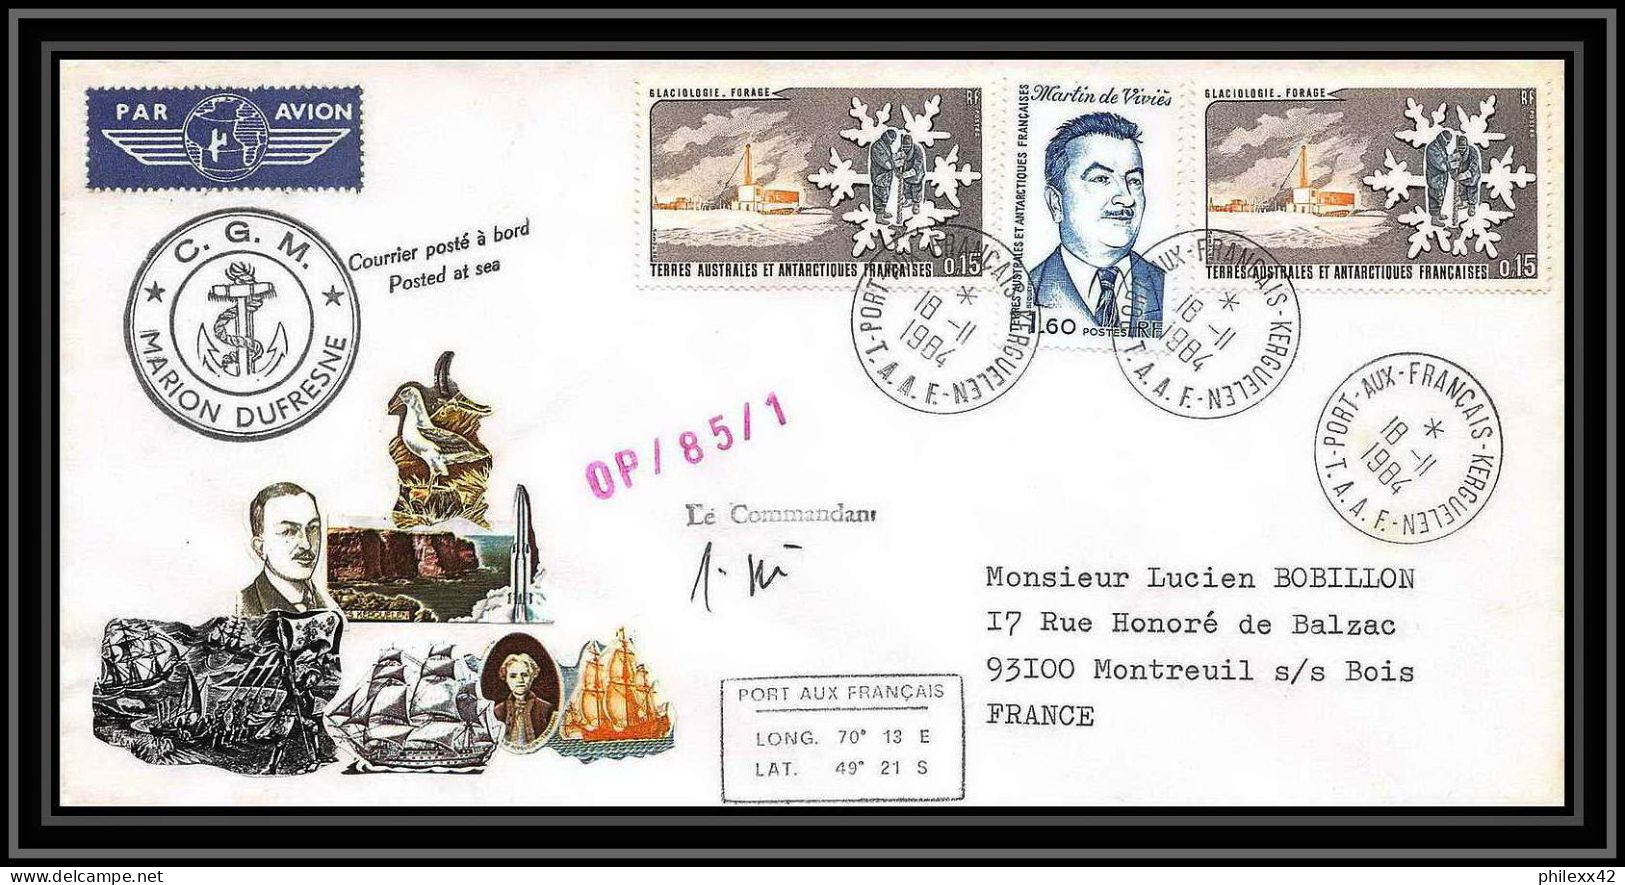 2278 ANTARCTIC Terres Australes TAAF Lettre Cover Dufresne OP 85/1 Signé Signed 18/11/1984 - Covers & Documents